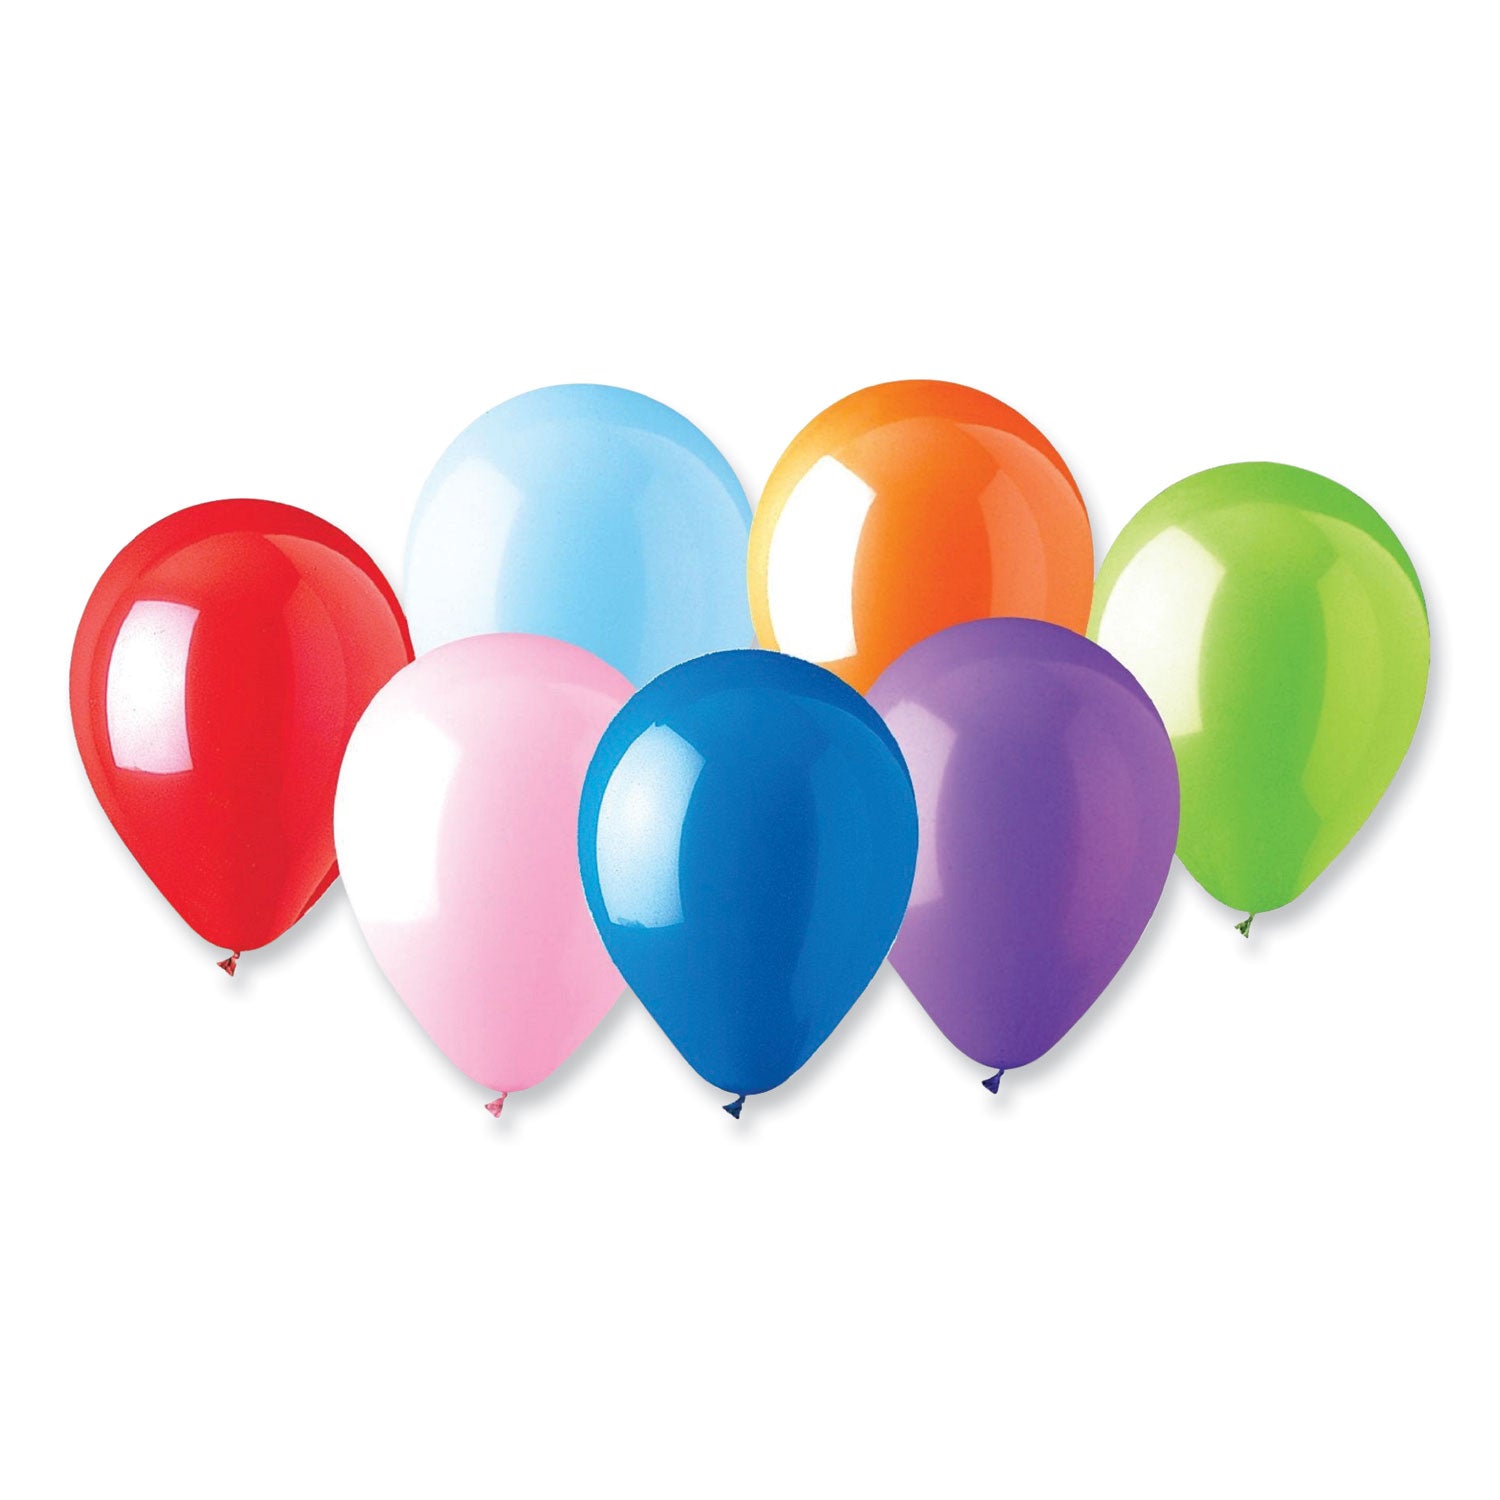 balloons-12-helium-quality-latex-assorted-colors-100-pack-20-packs-carton_tbl916100 - 2